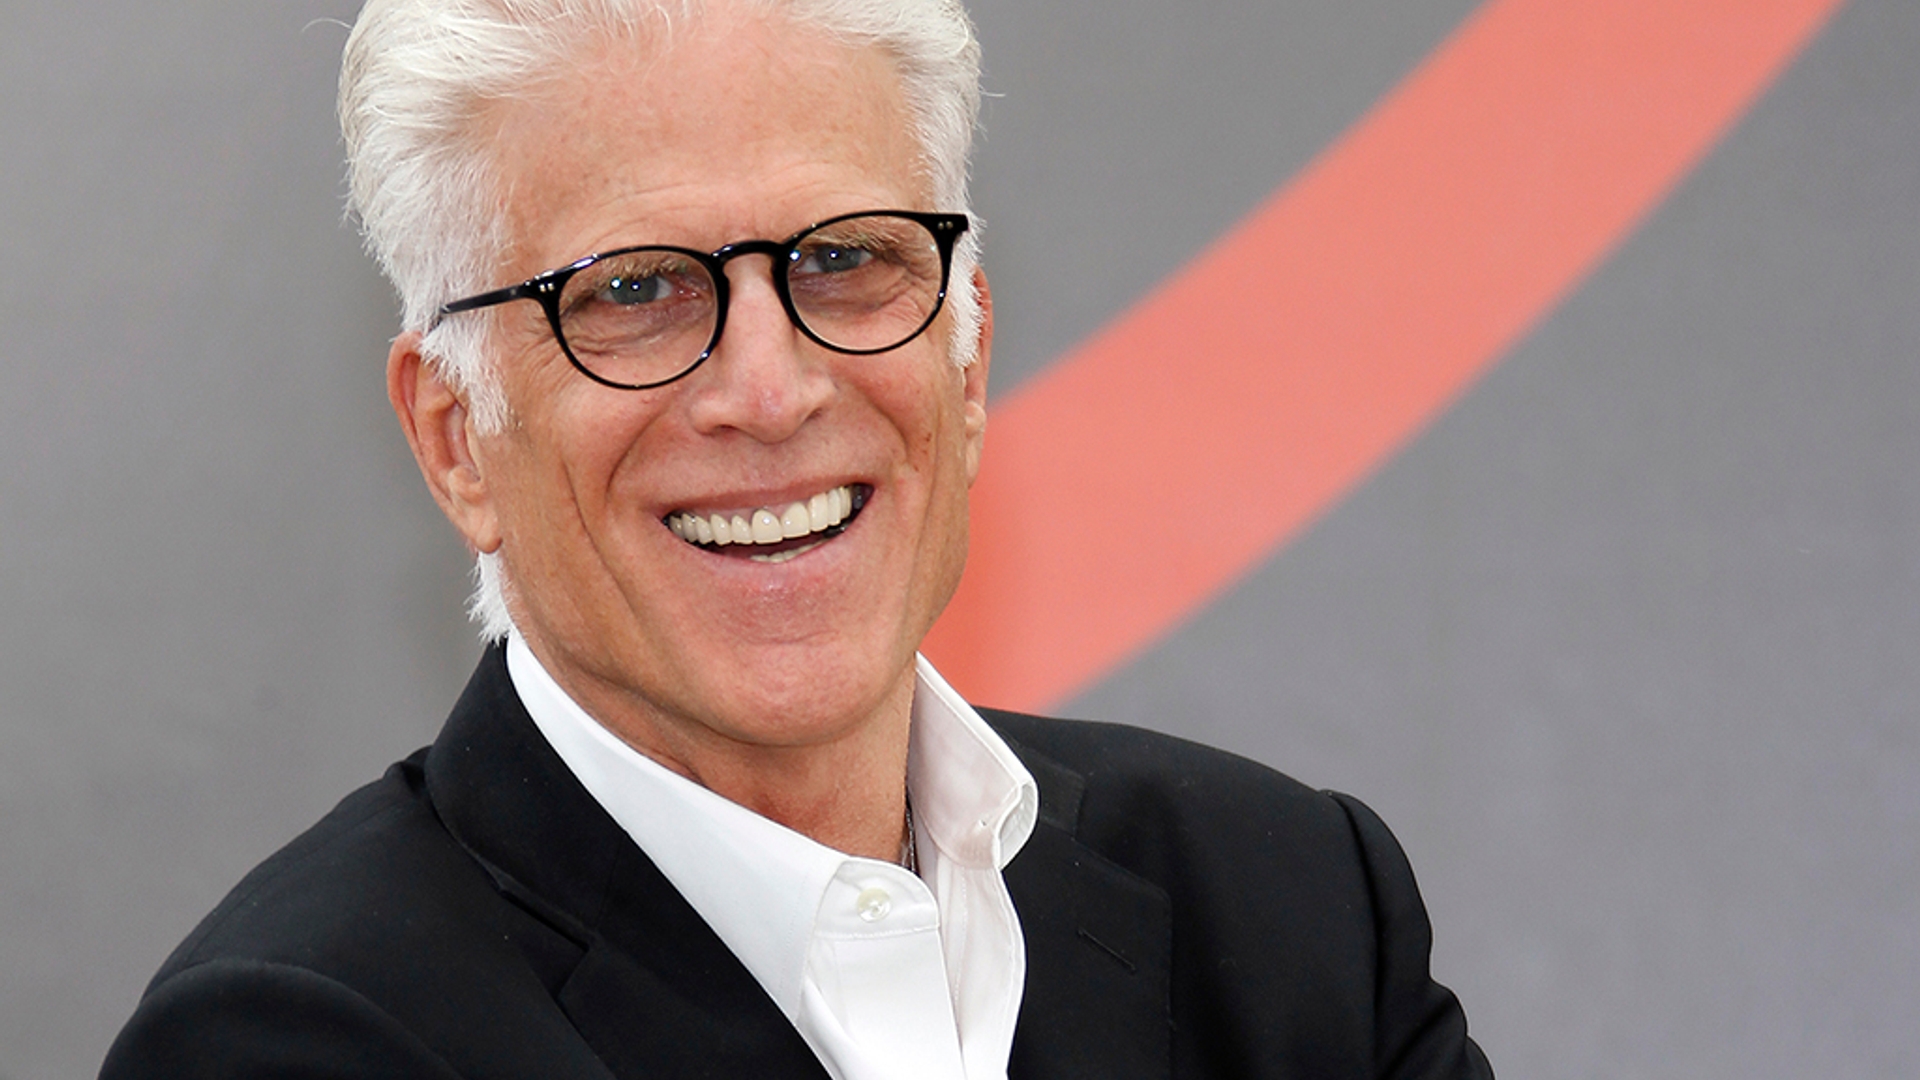 Cast member Danson poses during a photocall at the 52nd Monte Carlo Television Festival in Monaco